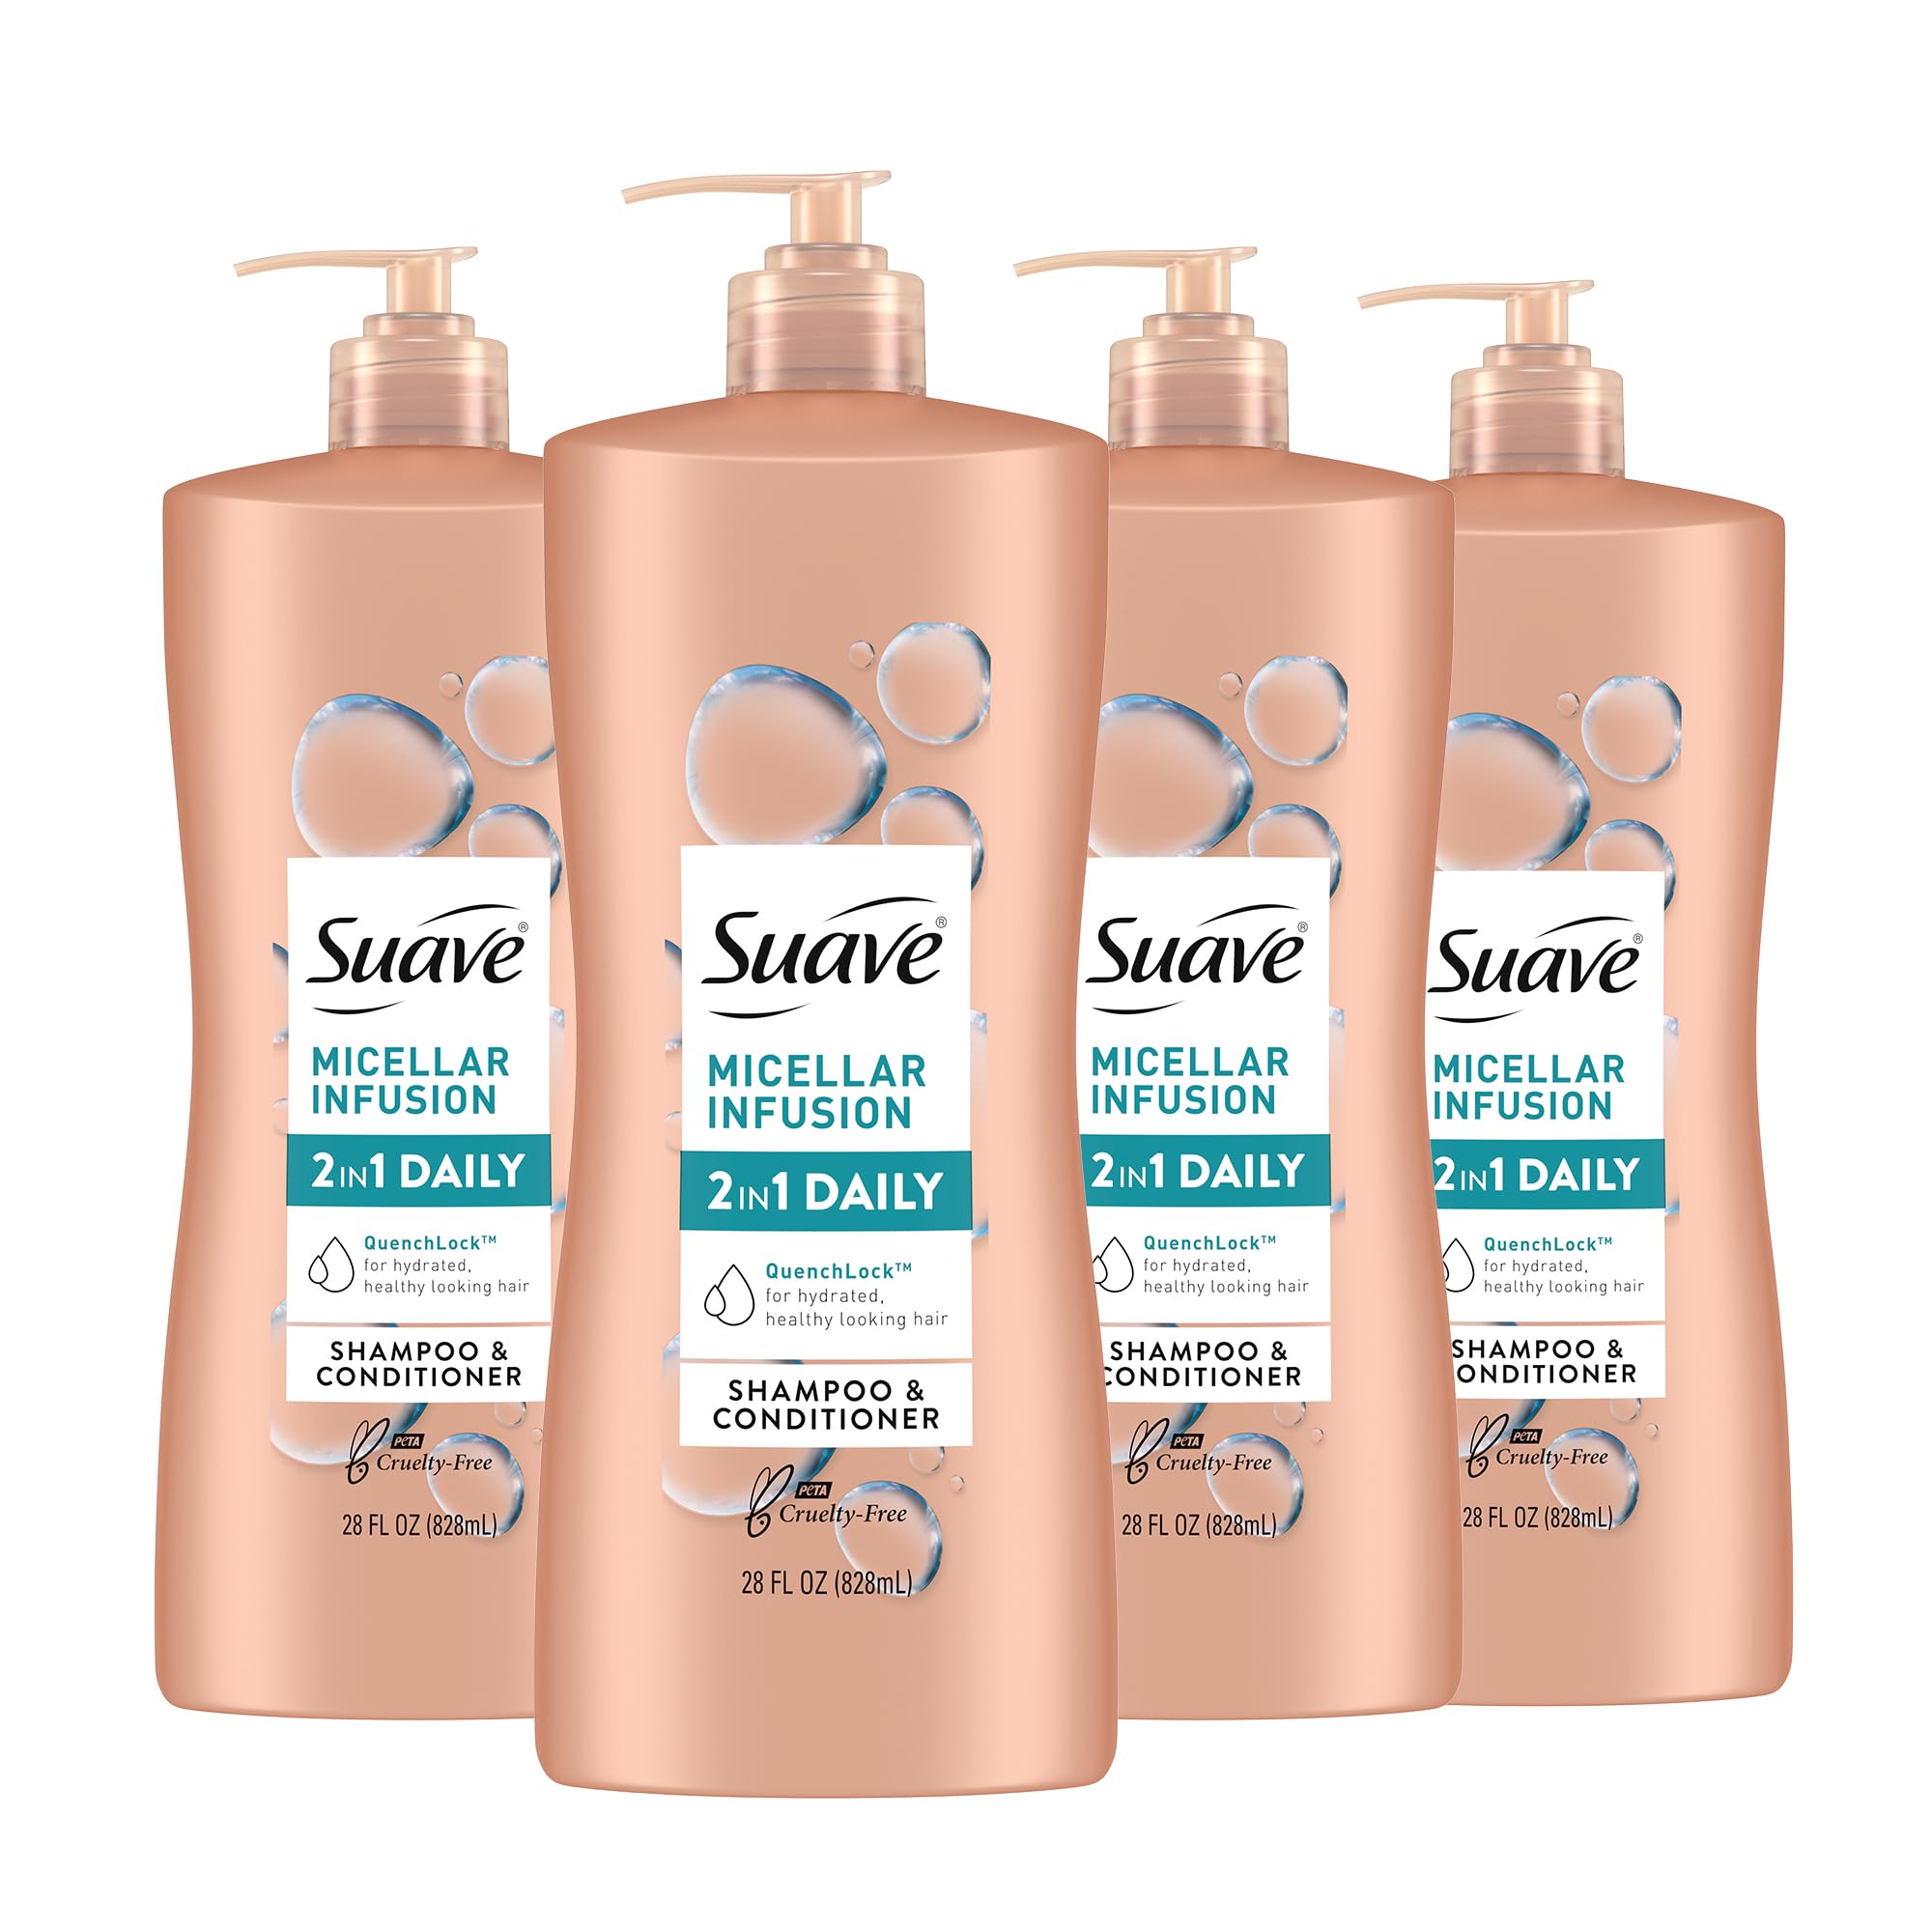 Suave 2 in 1 Shampoo and Conditioner with Micellar Infusion, cleansing and conditoning For All Hair Types, 28 oz Pack of 4